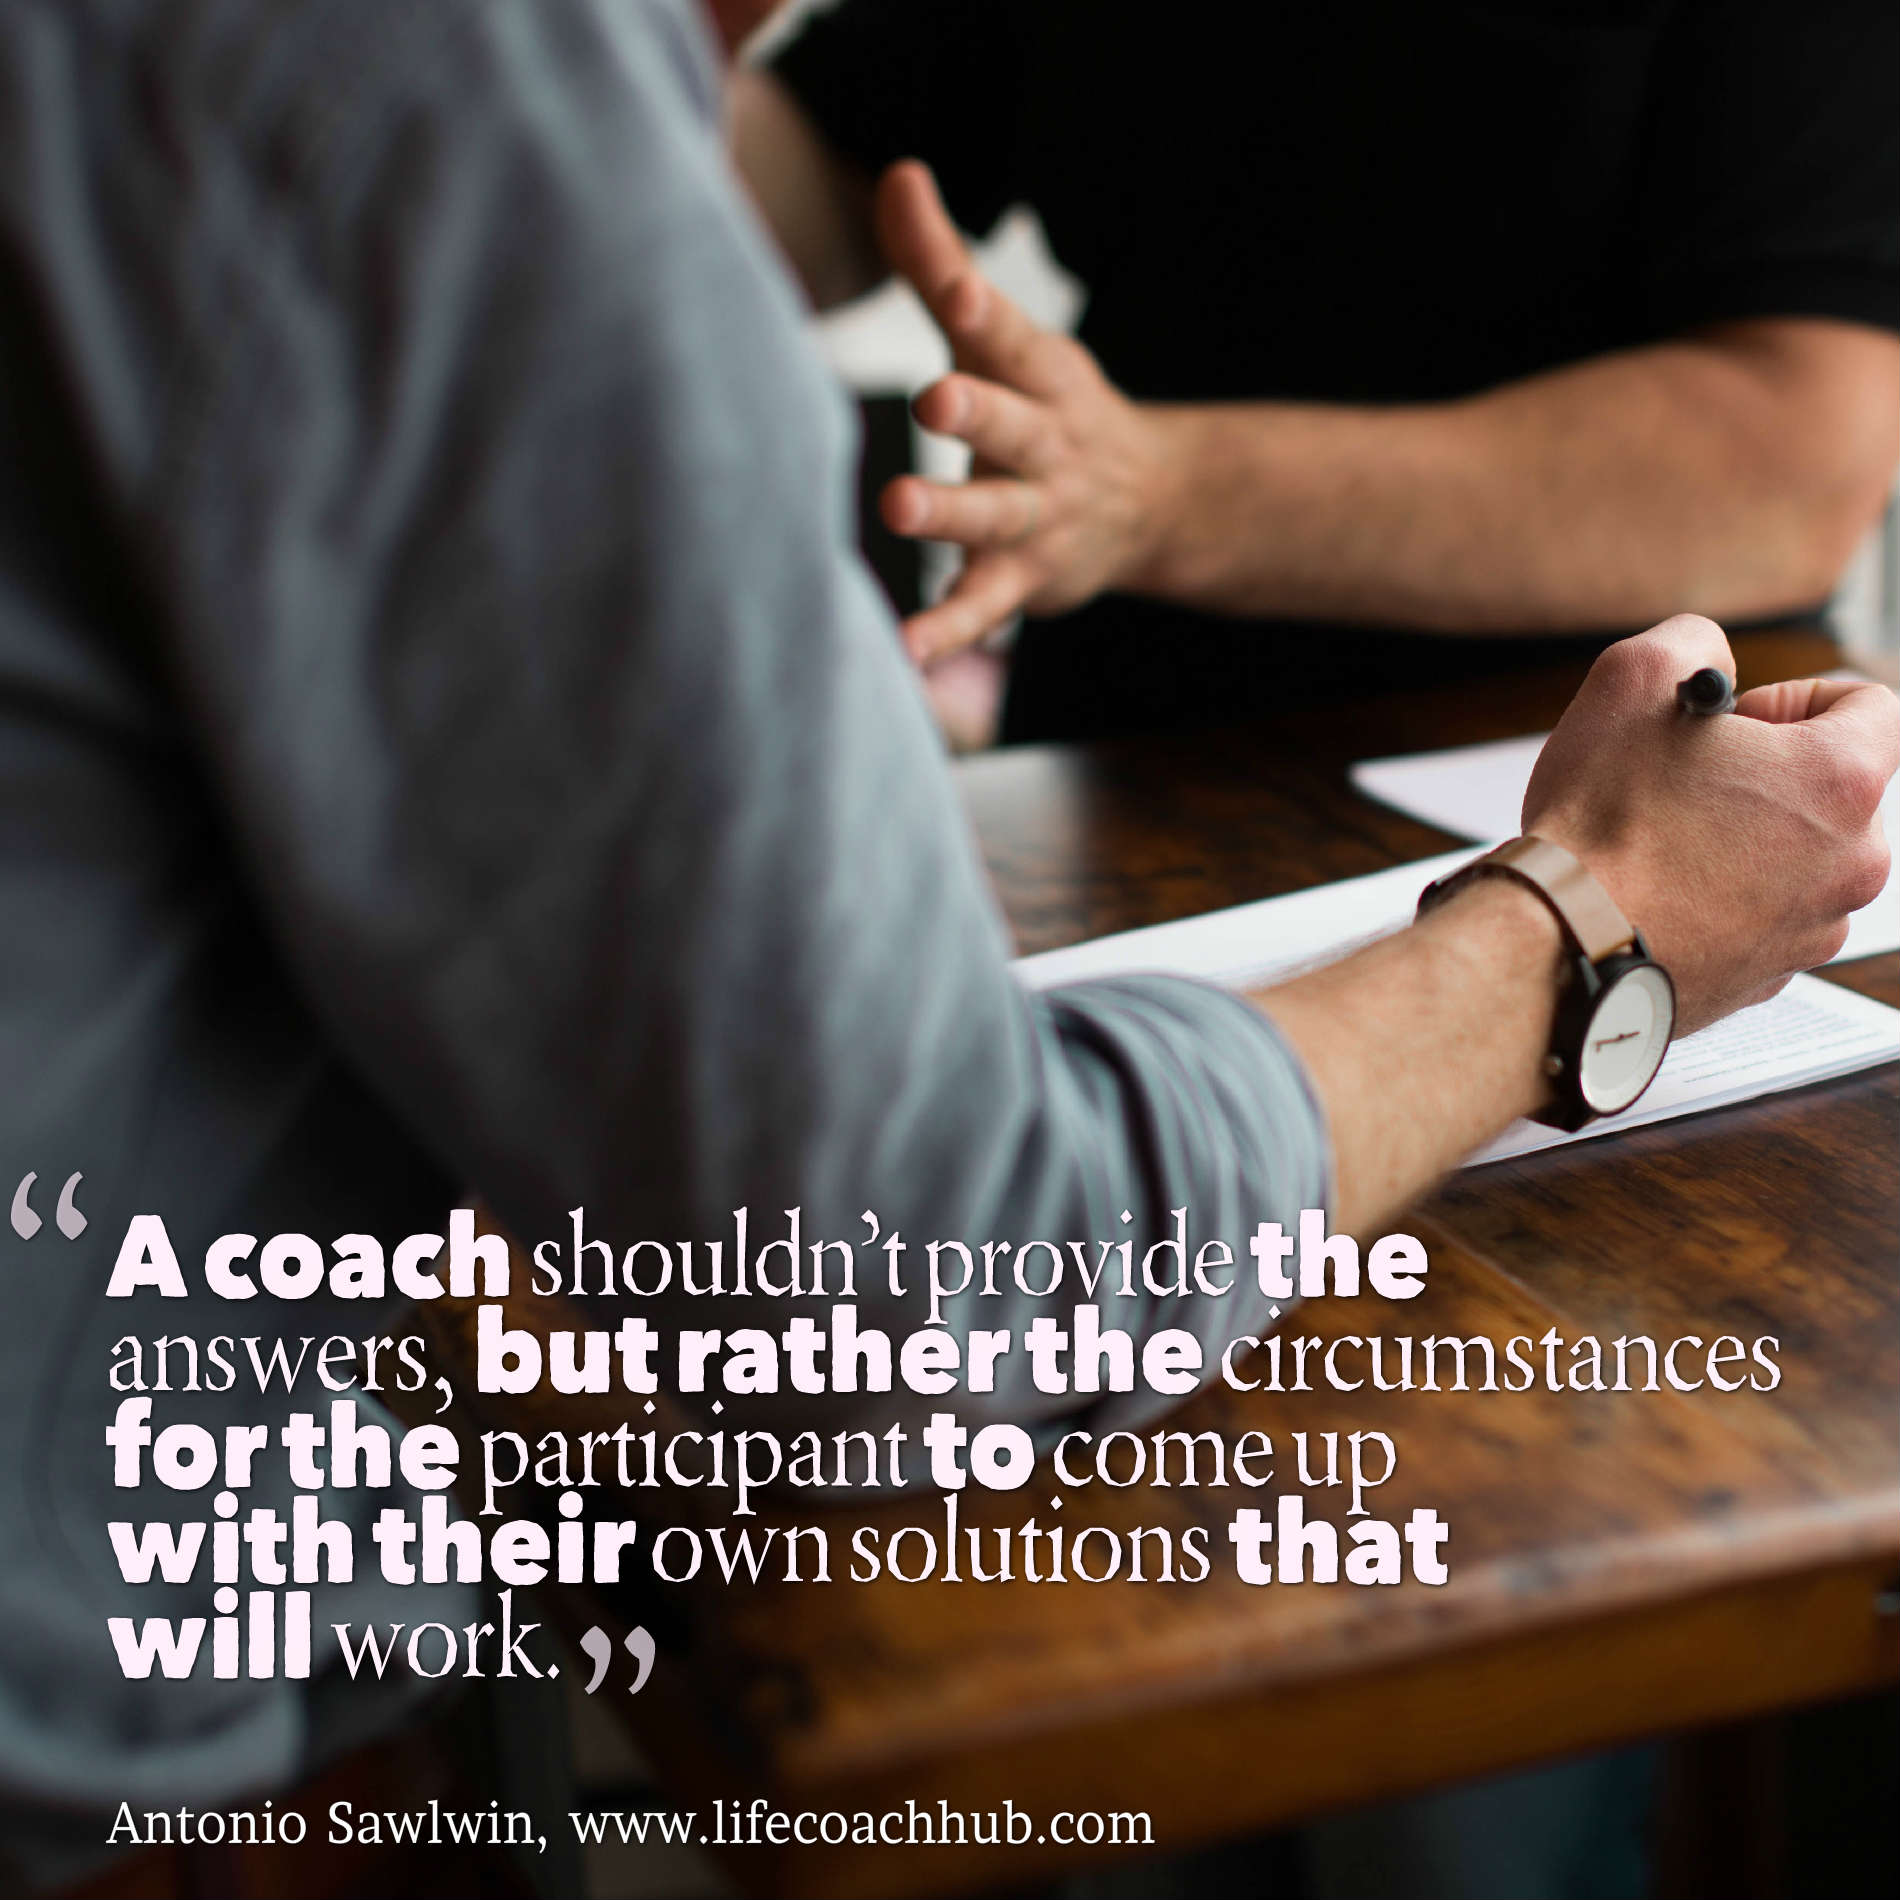 A Coach Shouldn't Provide the Answers